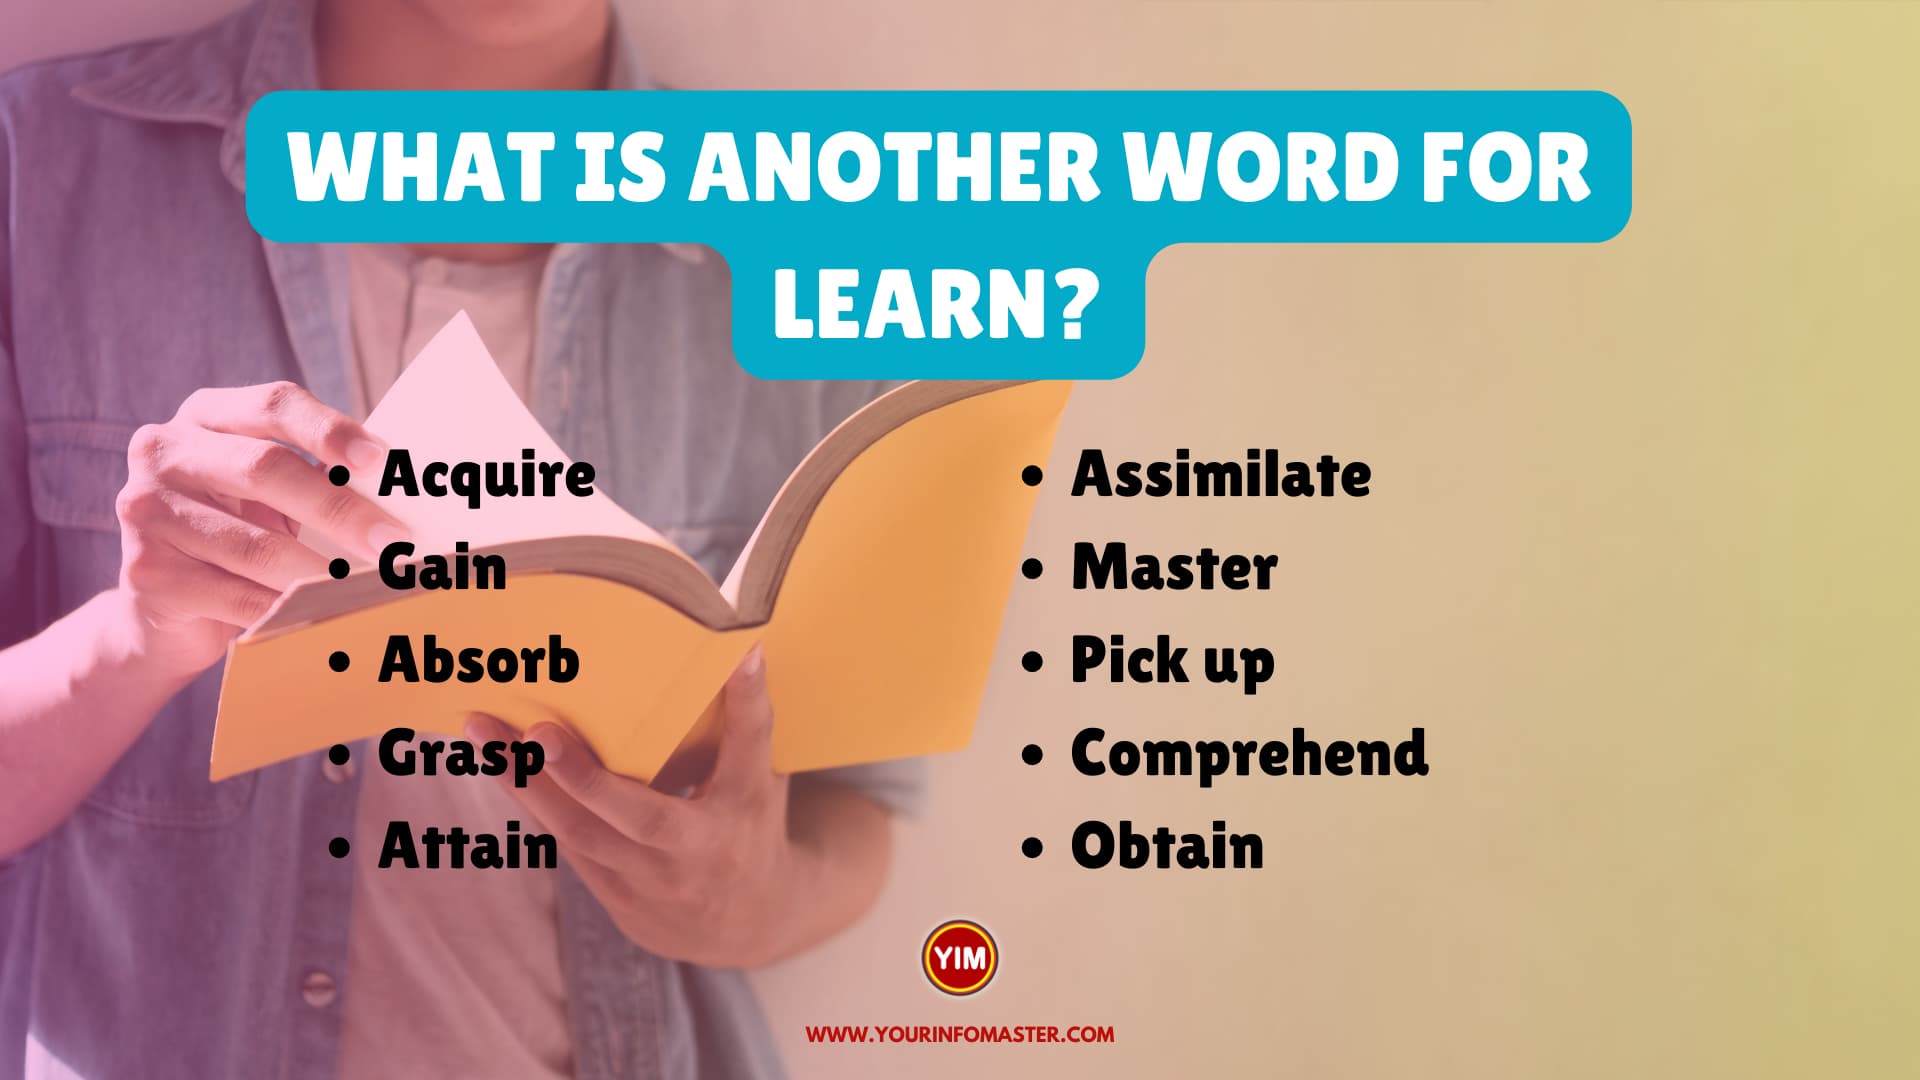 What is another word for Learn